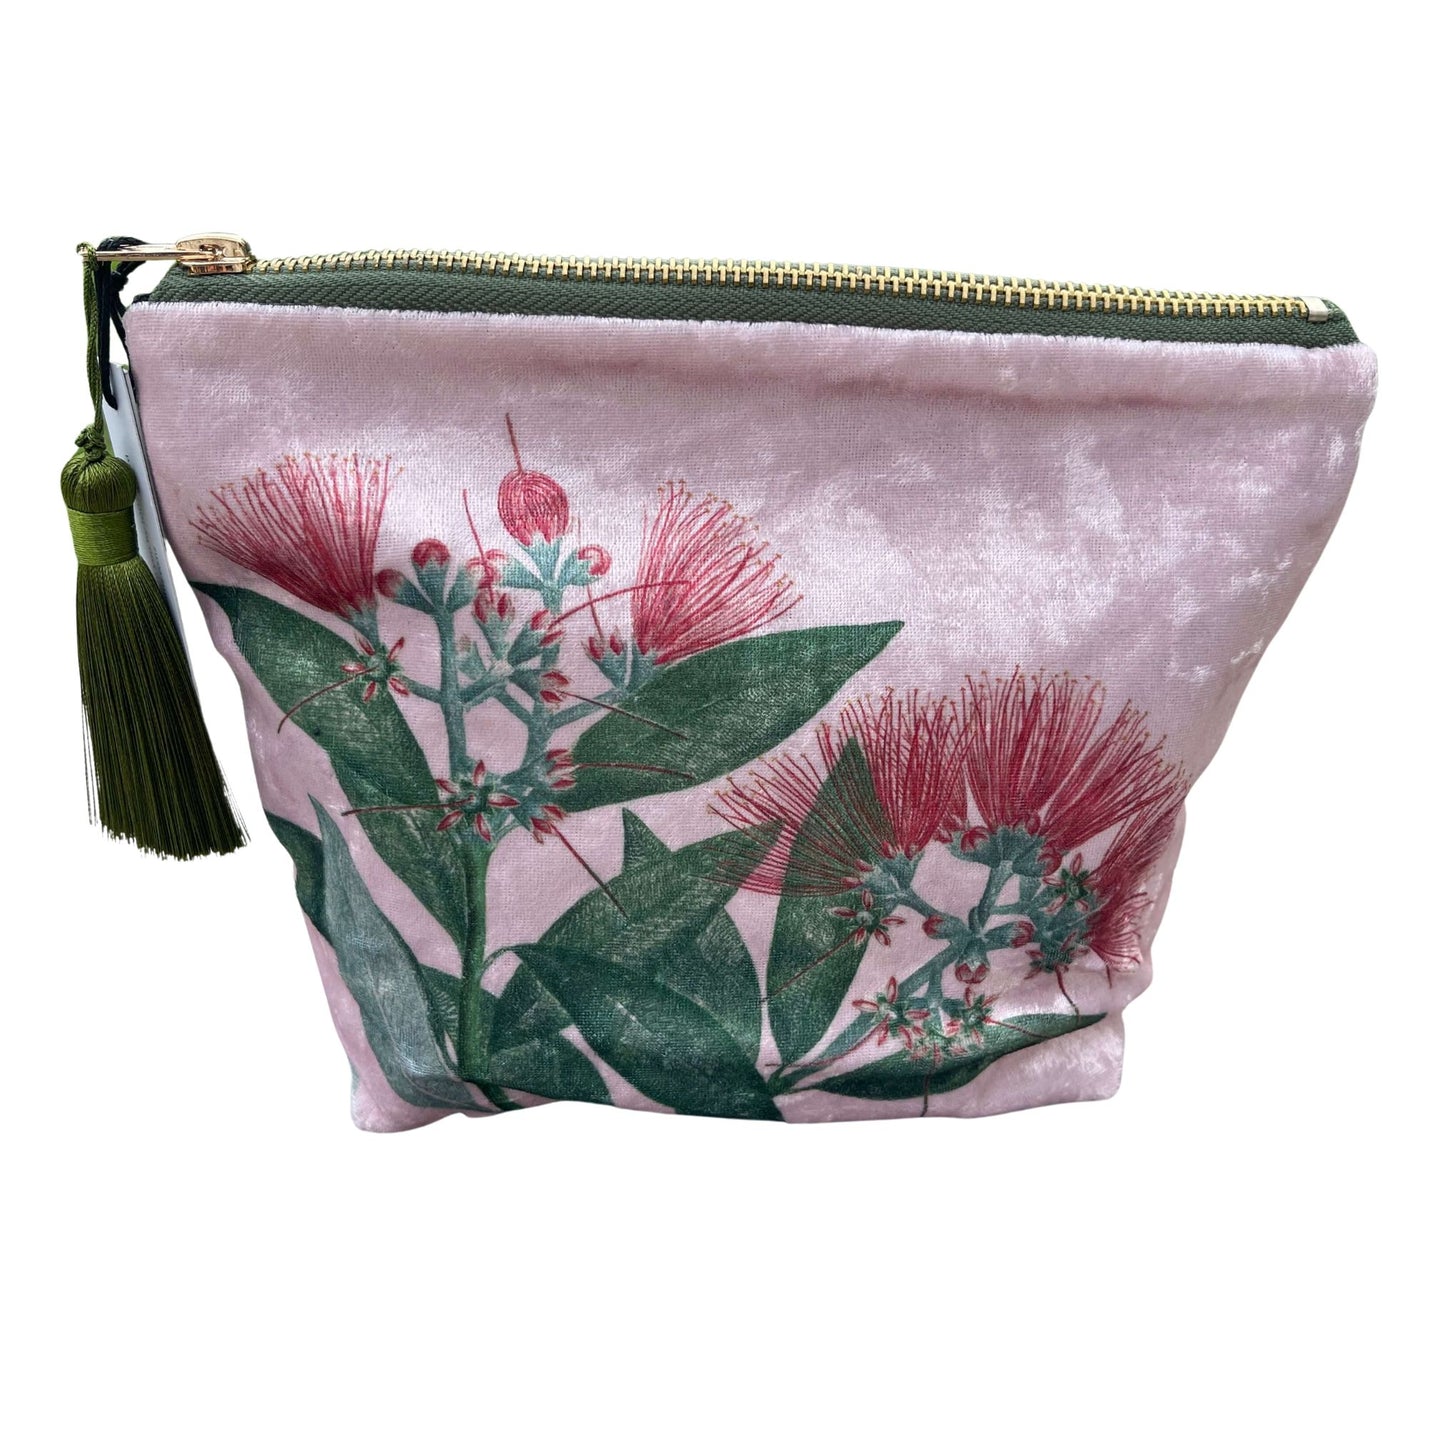 Pale pink velvet cosmetic bag with green tassel and a Pohutukawa flower print.